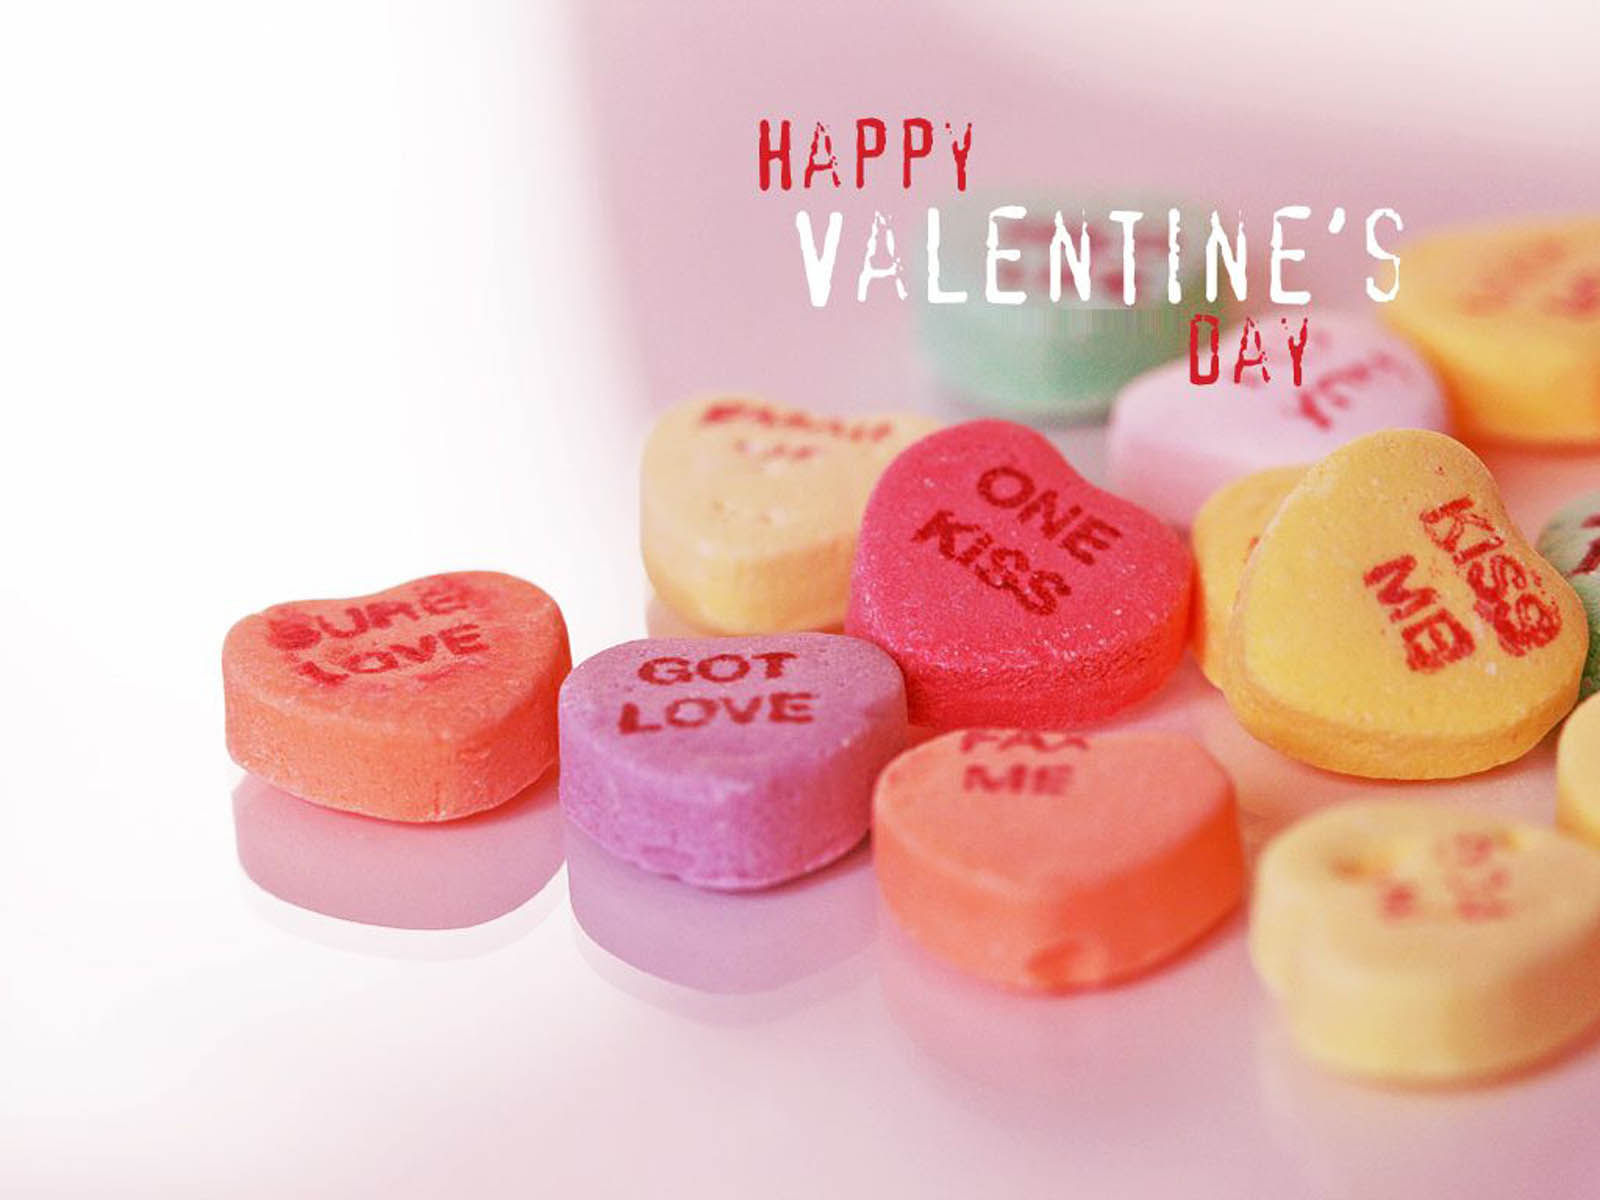 Tag Valentines Day Desktop Wallpaper Background Paos Image And